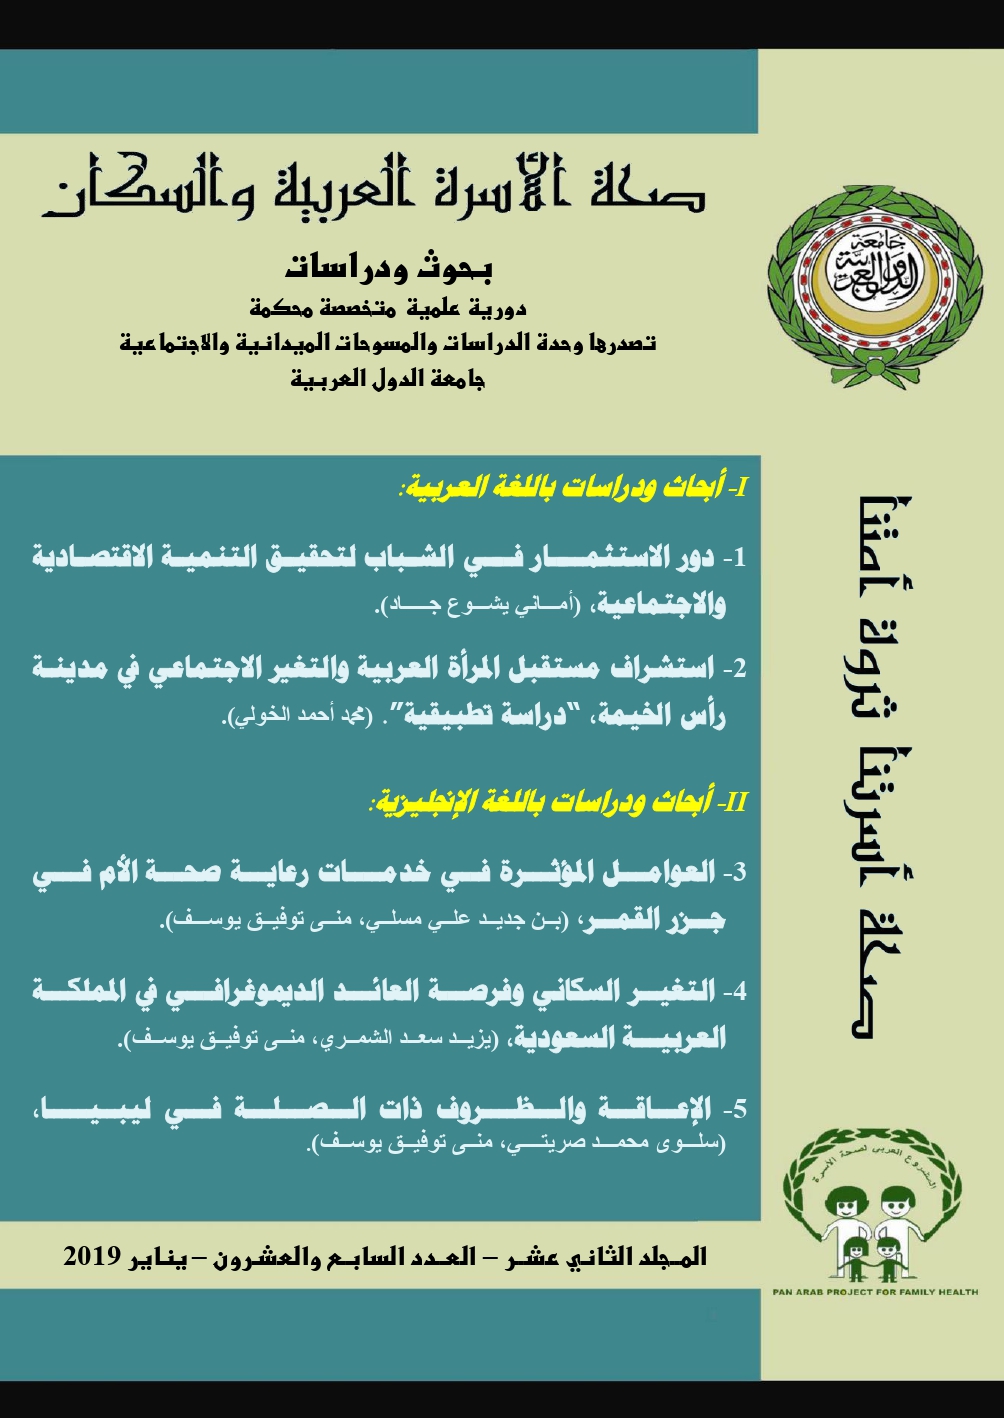 1-Cover and Intruduction  Arabic.jpg